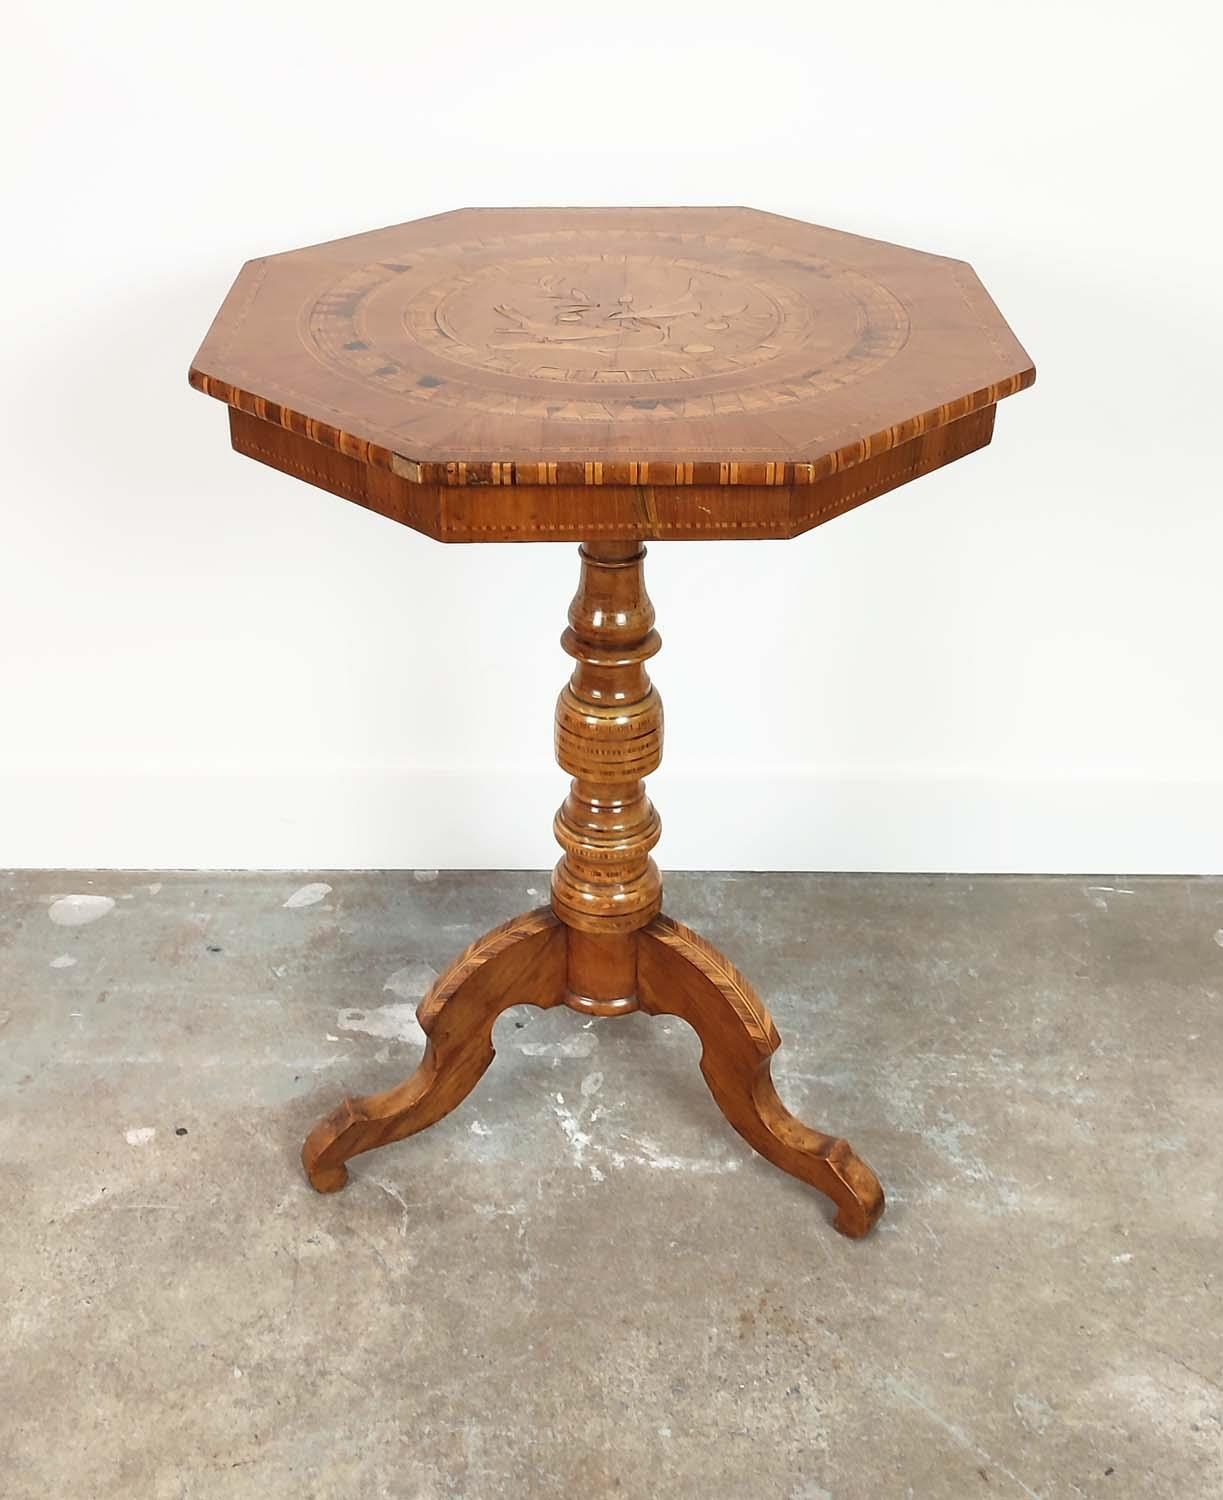 OCCASIONAL TABLE, mid 19th century Italian walnut, marquetry and parquetry with octagonal top on